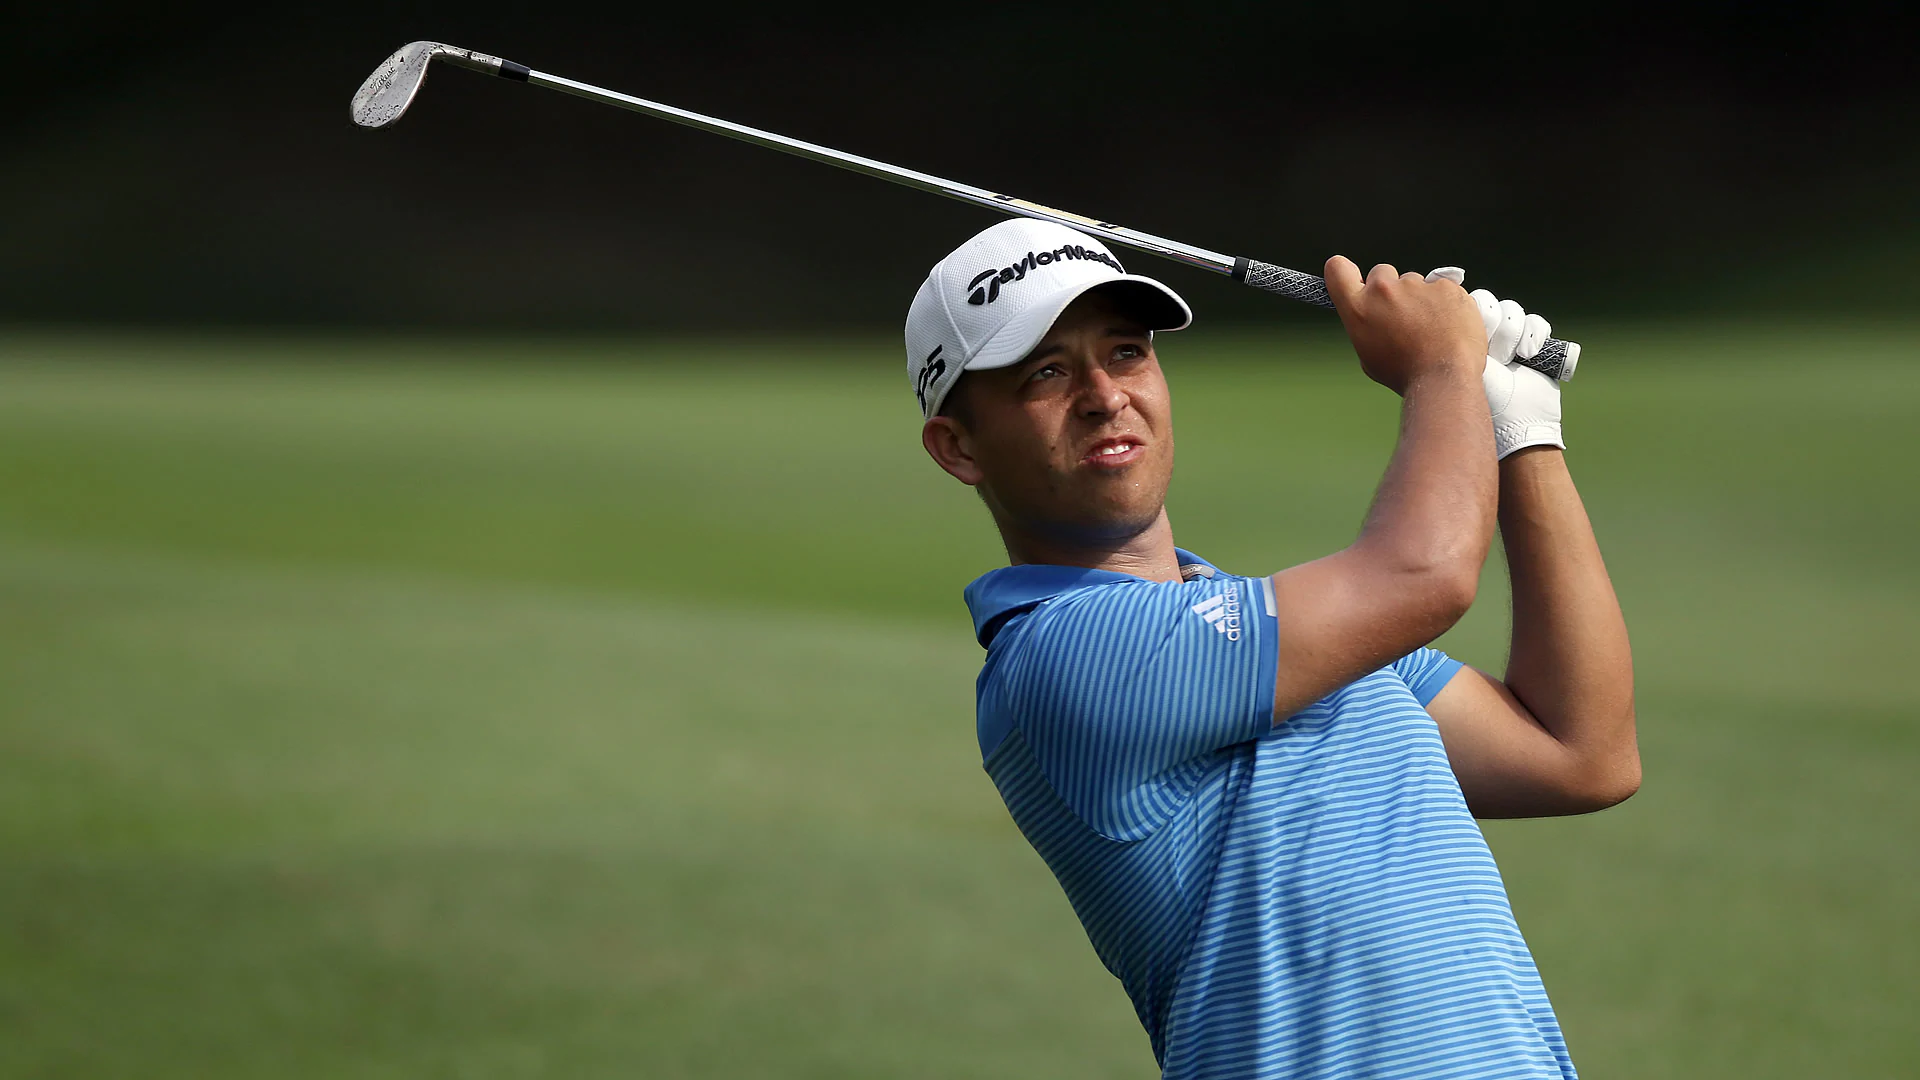 Schauffele 1 back at CIMB; in final group for first time